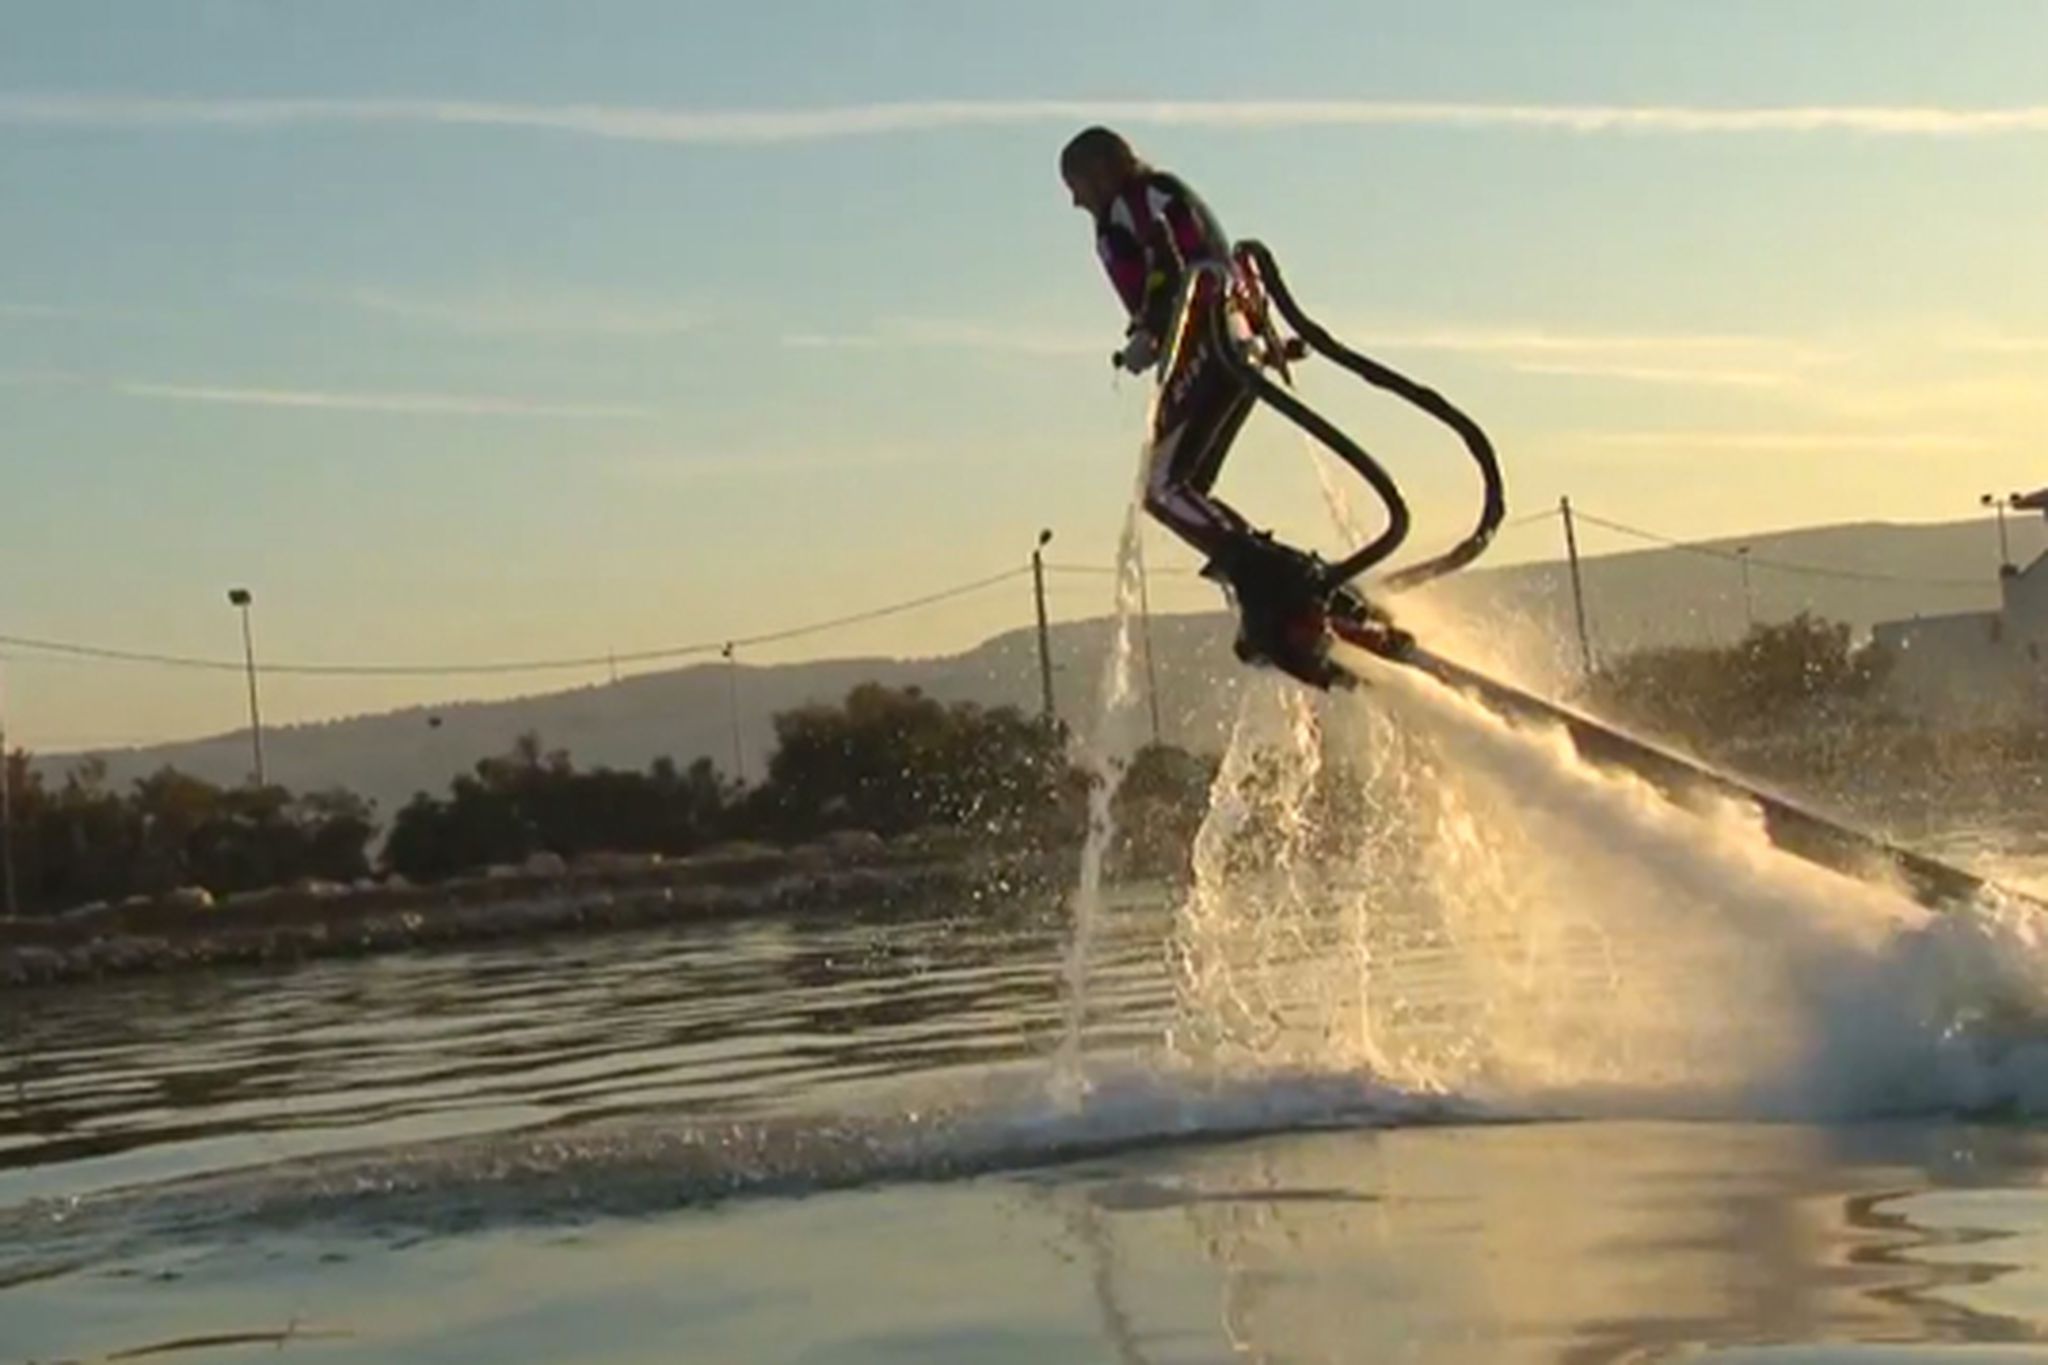 Water-powered Flyboard gives you Iron Man-style lift - The Verge